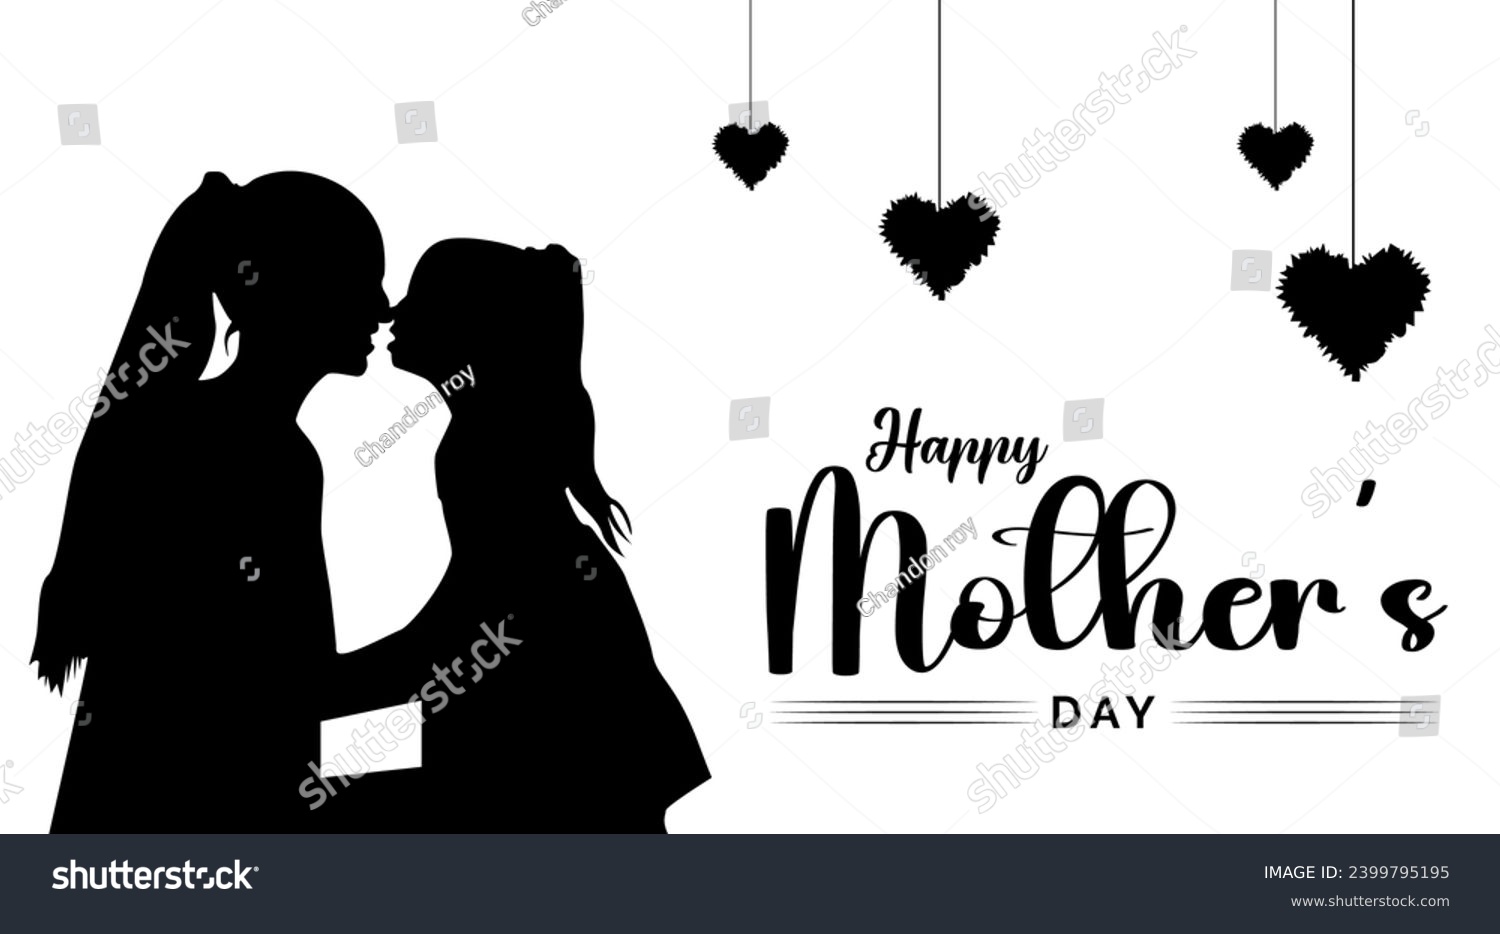 SVG of Vector silhouette of happy mothers day mother holding child. svg